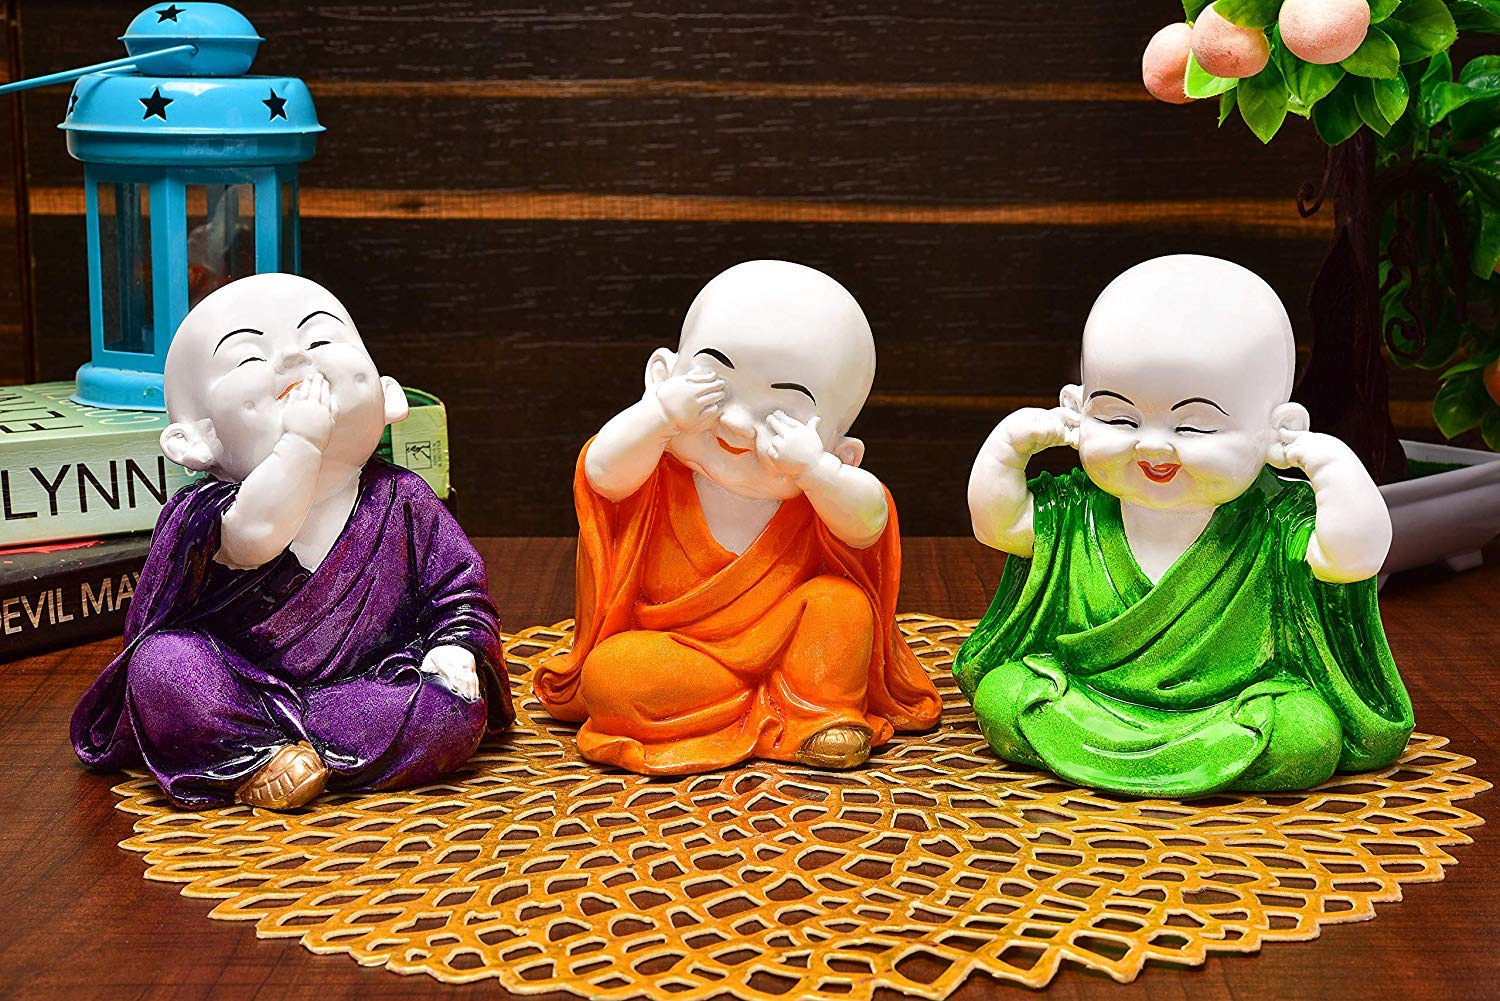 Buy Expleaisa Cute Baby Monk Buddha With Potli Hand crafted Gift Item for  Home Decor, Shelf Decor, Office Decor Showpiece Statue Modern Art Statue  for Good Luck, Feng Shui, Vastu, Money Wealth-(12cm,Poly